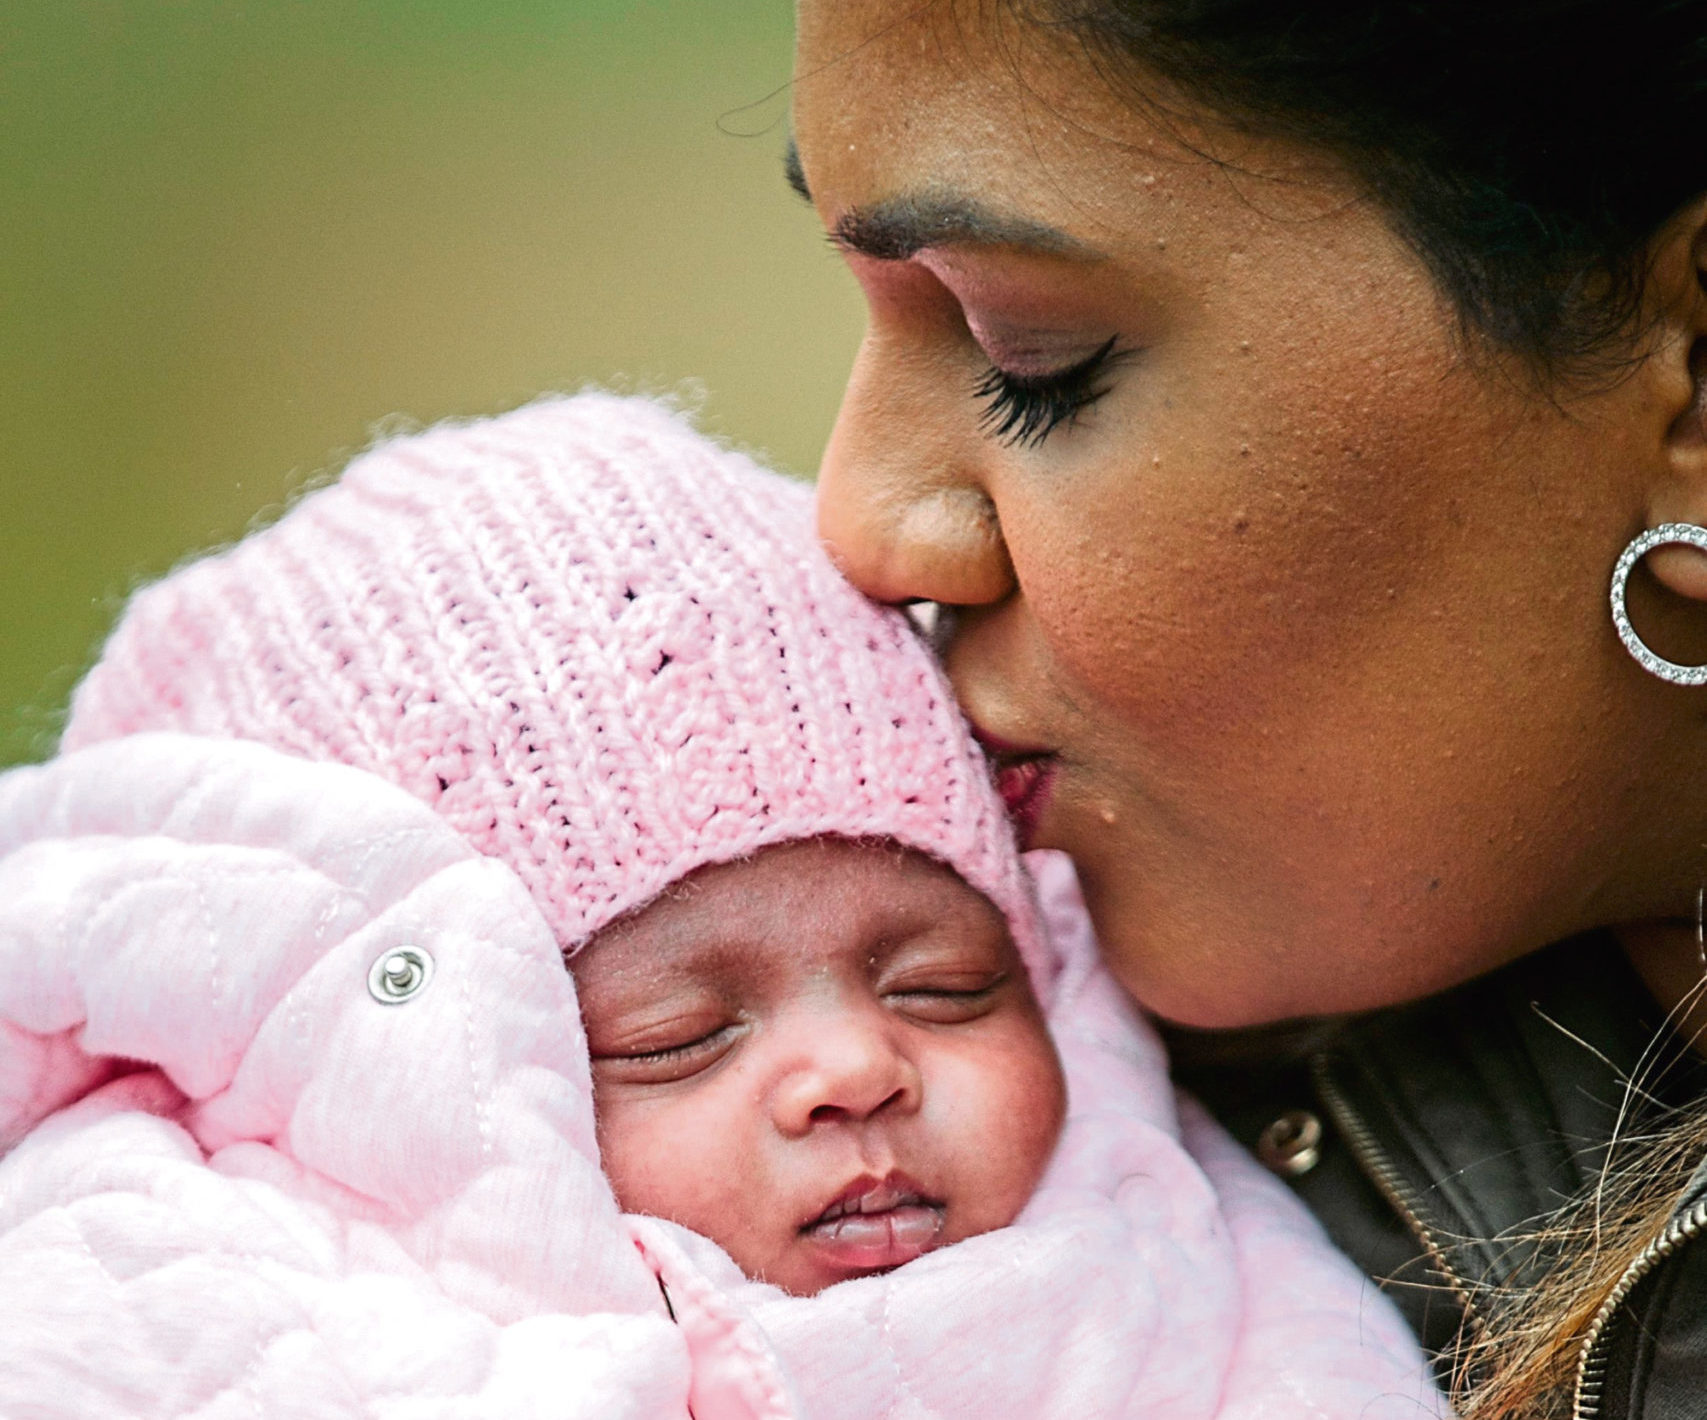 Ashvine, fully recovered, kisses her baby daughter Ashika Evie, who was born six weeks early